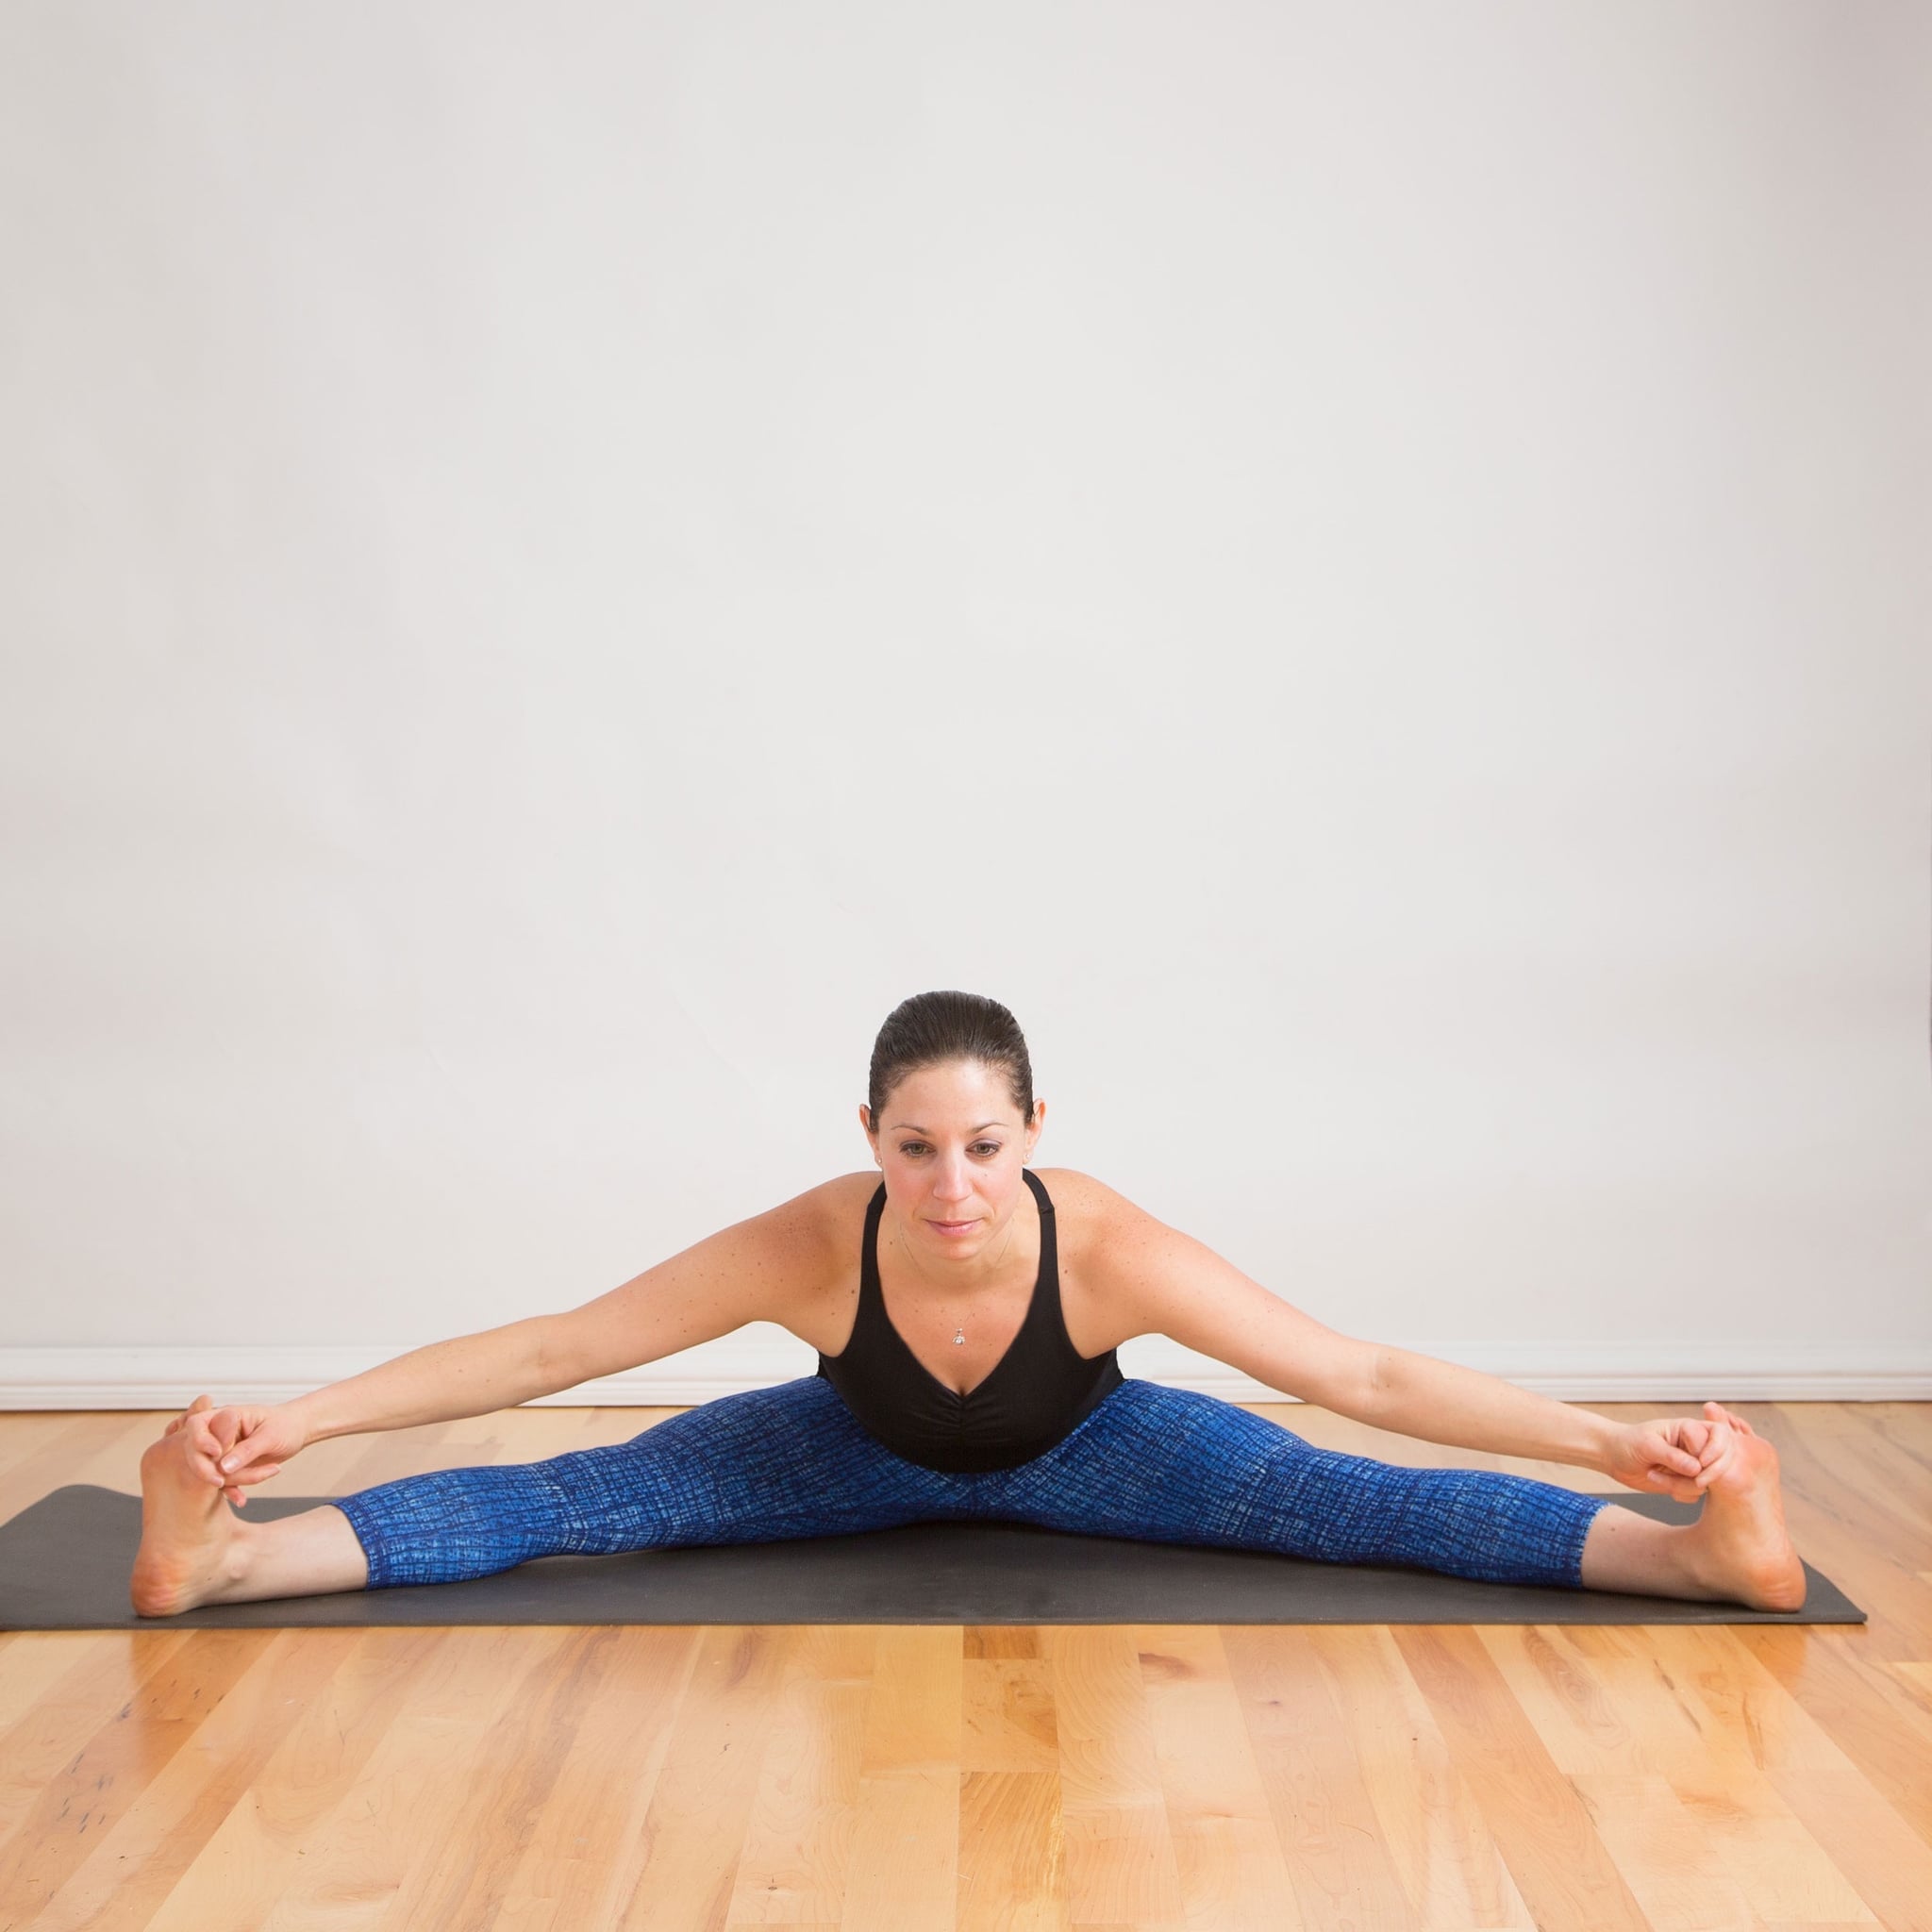 Seated Straddle | Ease That Aching Back With These Soothing Yoga Poses |  POPSUGAR Fitness Photo 8